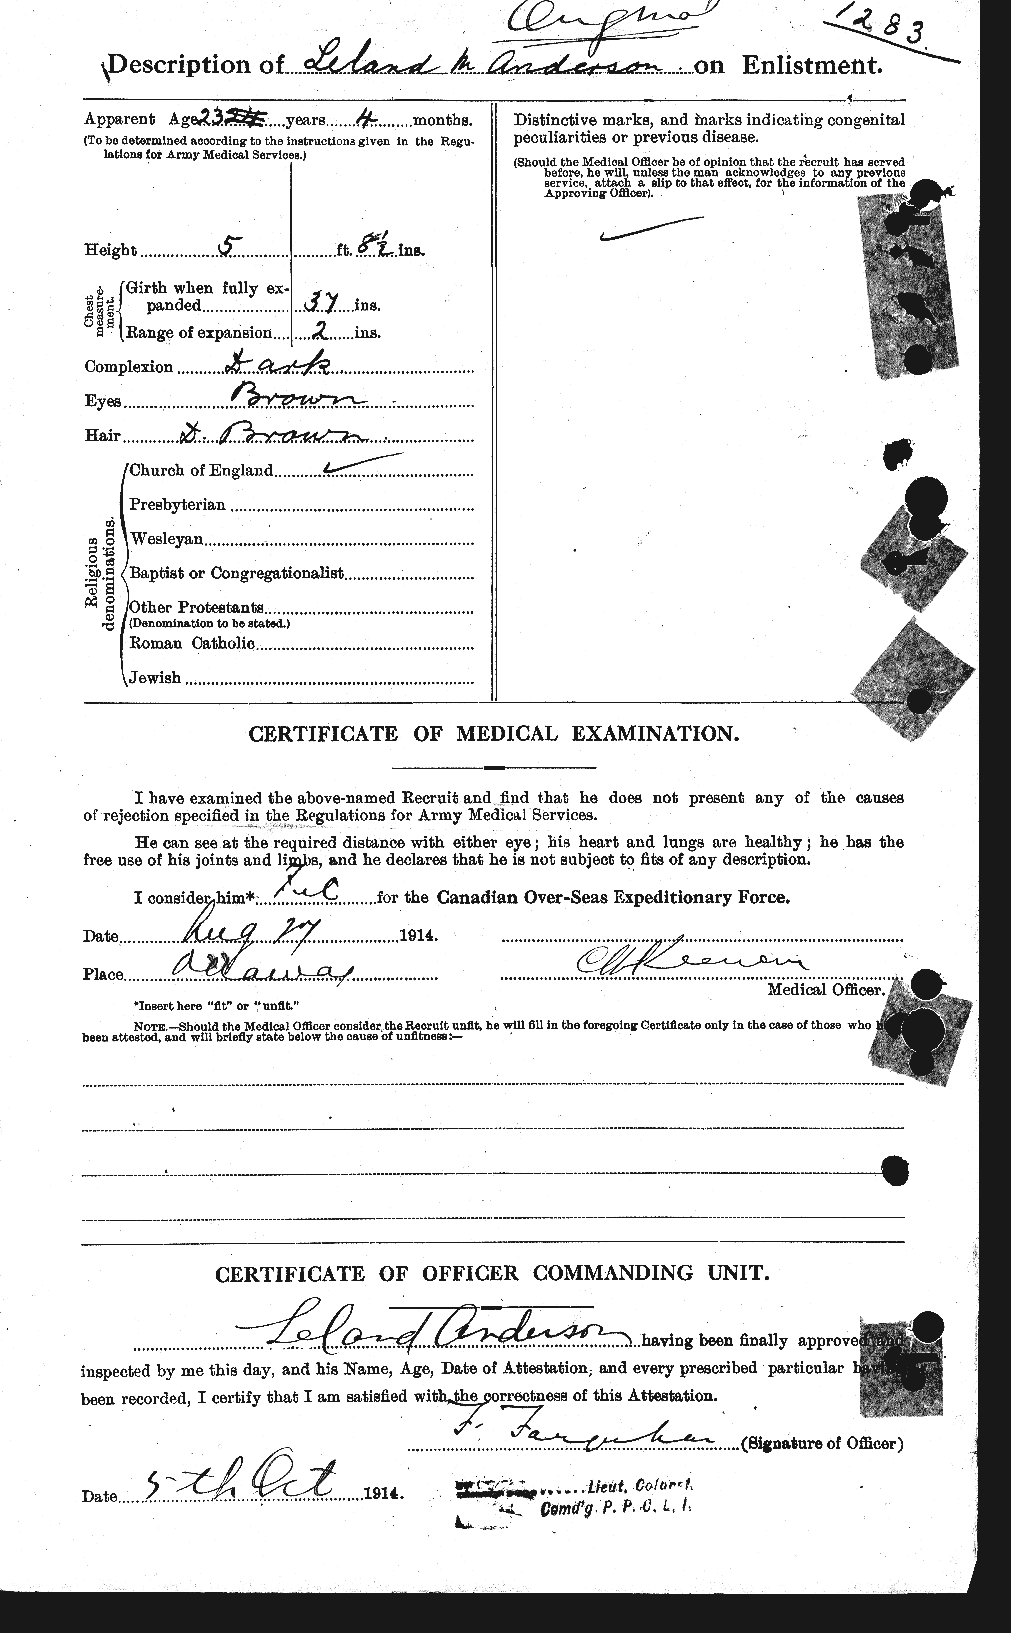 Personnel Records of the First World War - CEF 207527b